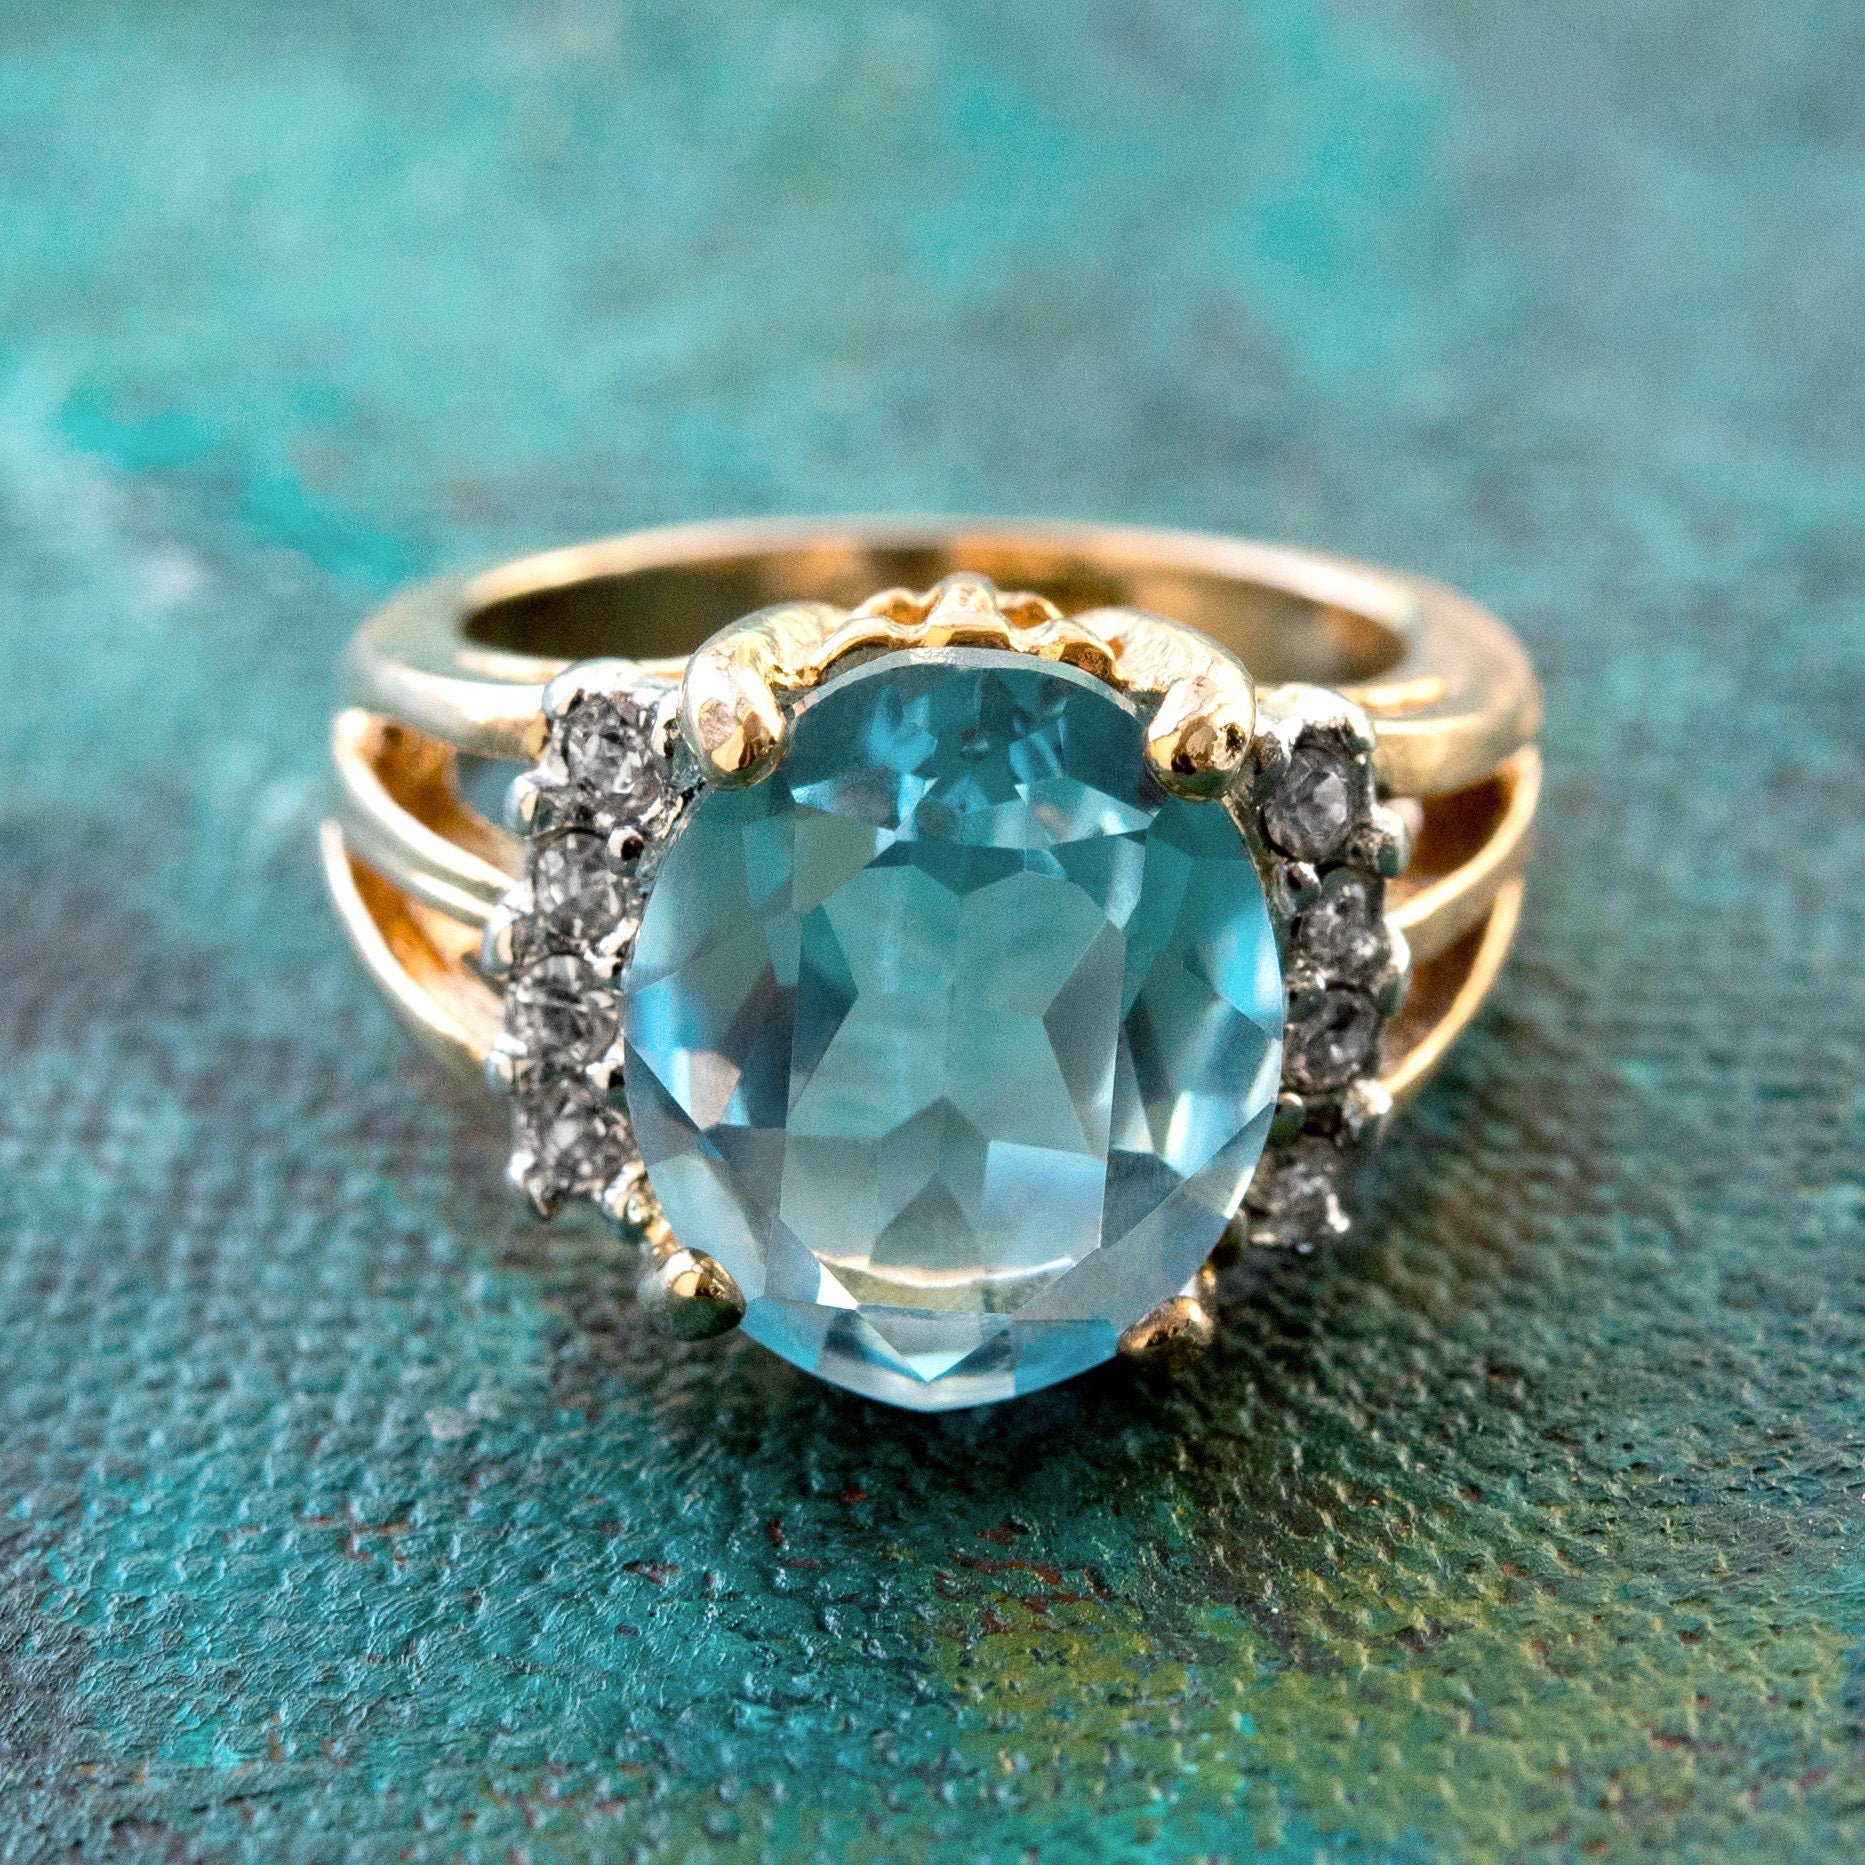 Vintage Ring 1980s Aquamarine Cubic Zirconia Ring Clear Swarovski Crystal 18k Gold Antique Womans Jewlery R1664 - Limited Stock - Never Worn